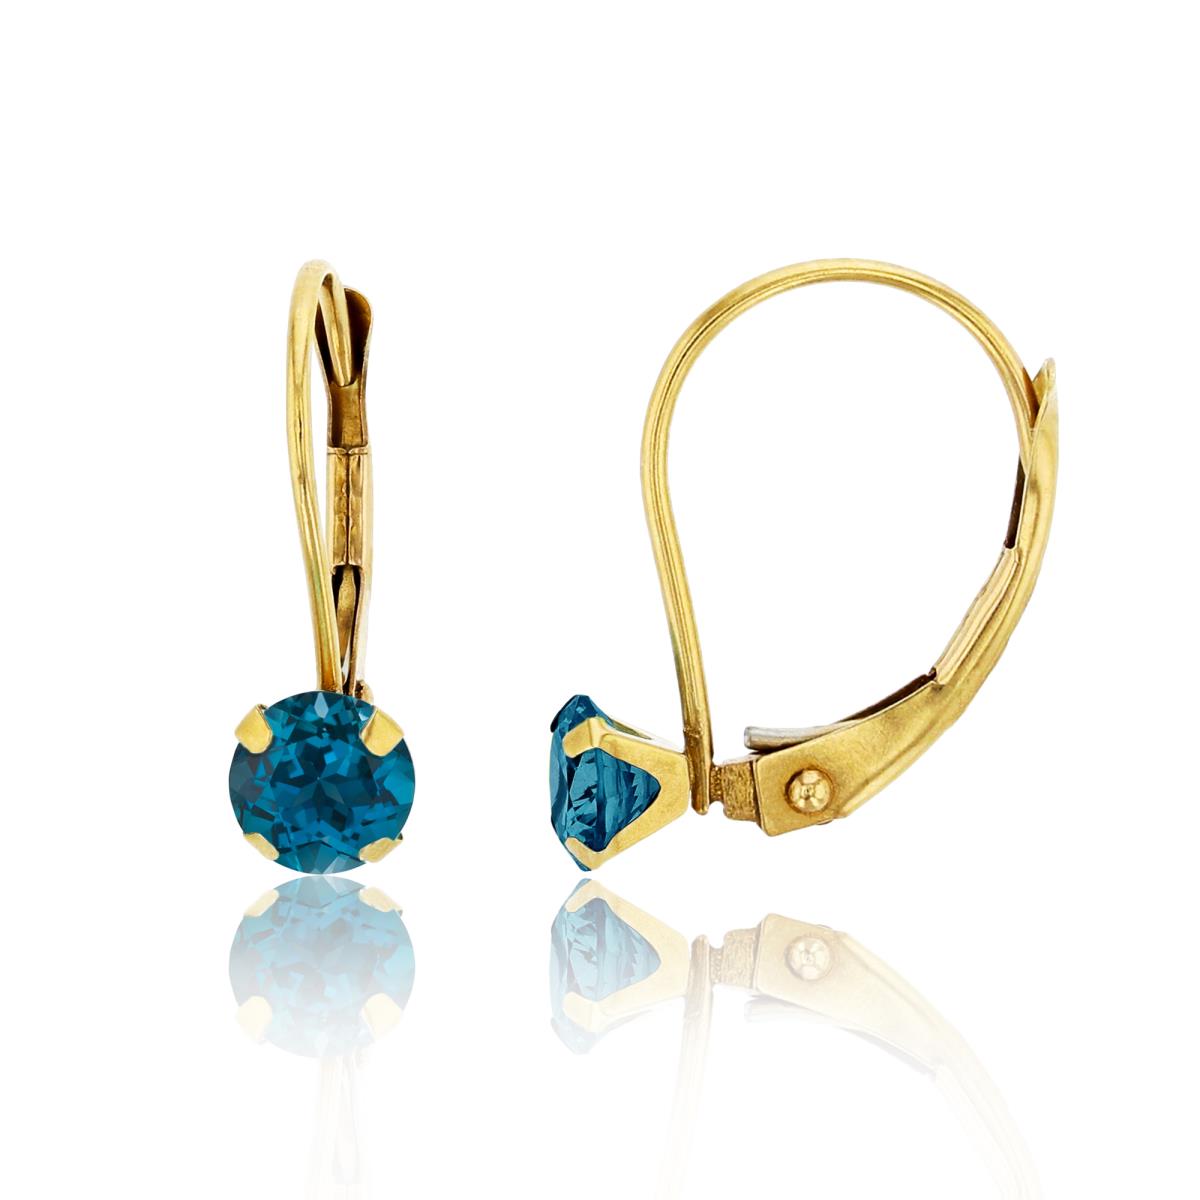 10K Yellow Gold 4.00mm Round London Blue Martini Leverback Earring